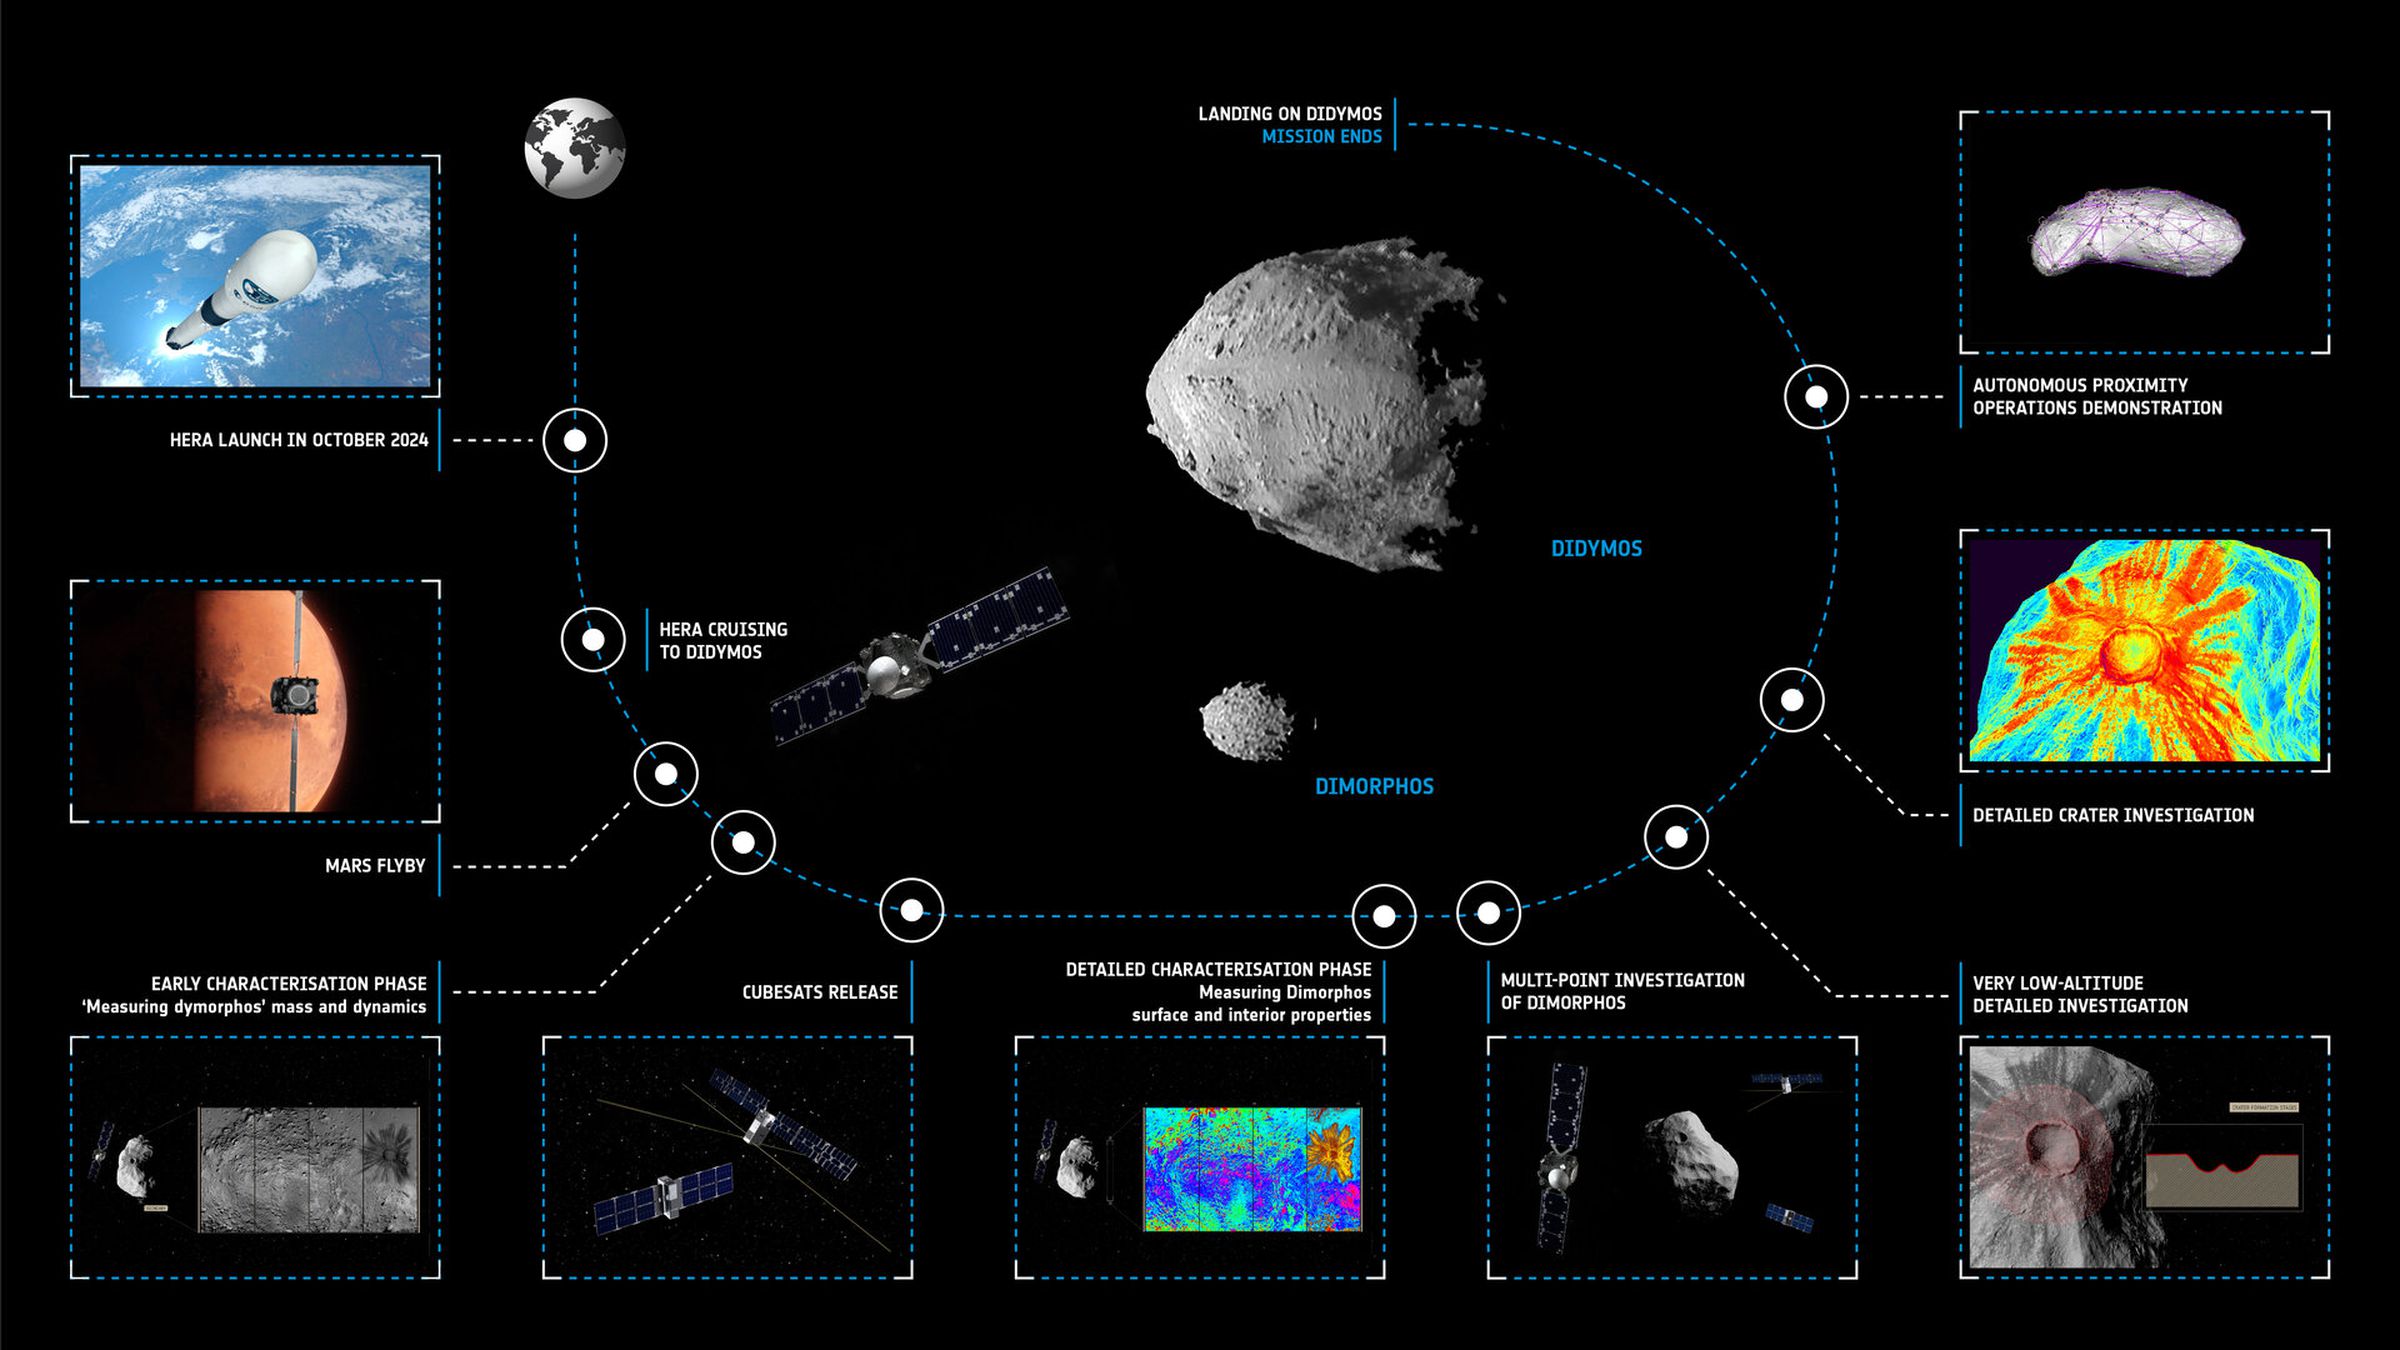 An infographic showing the timeline of the ESA’s Hera mission.